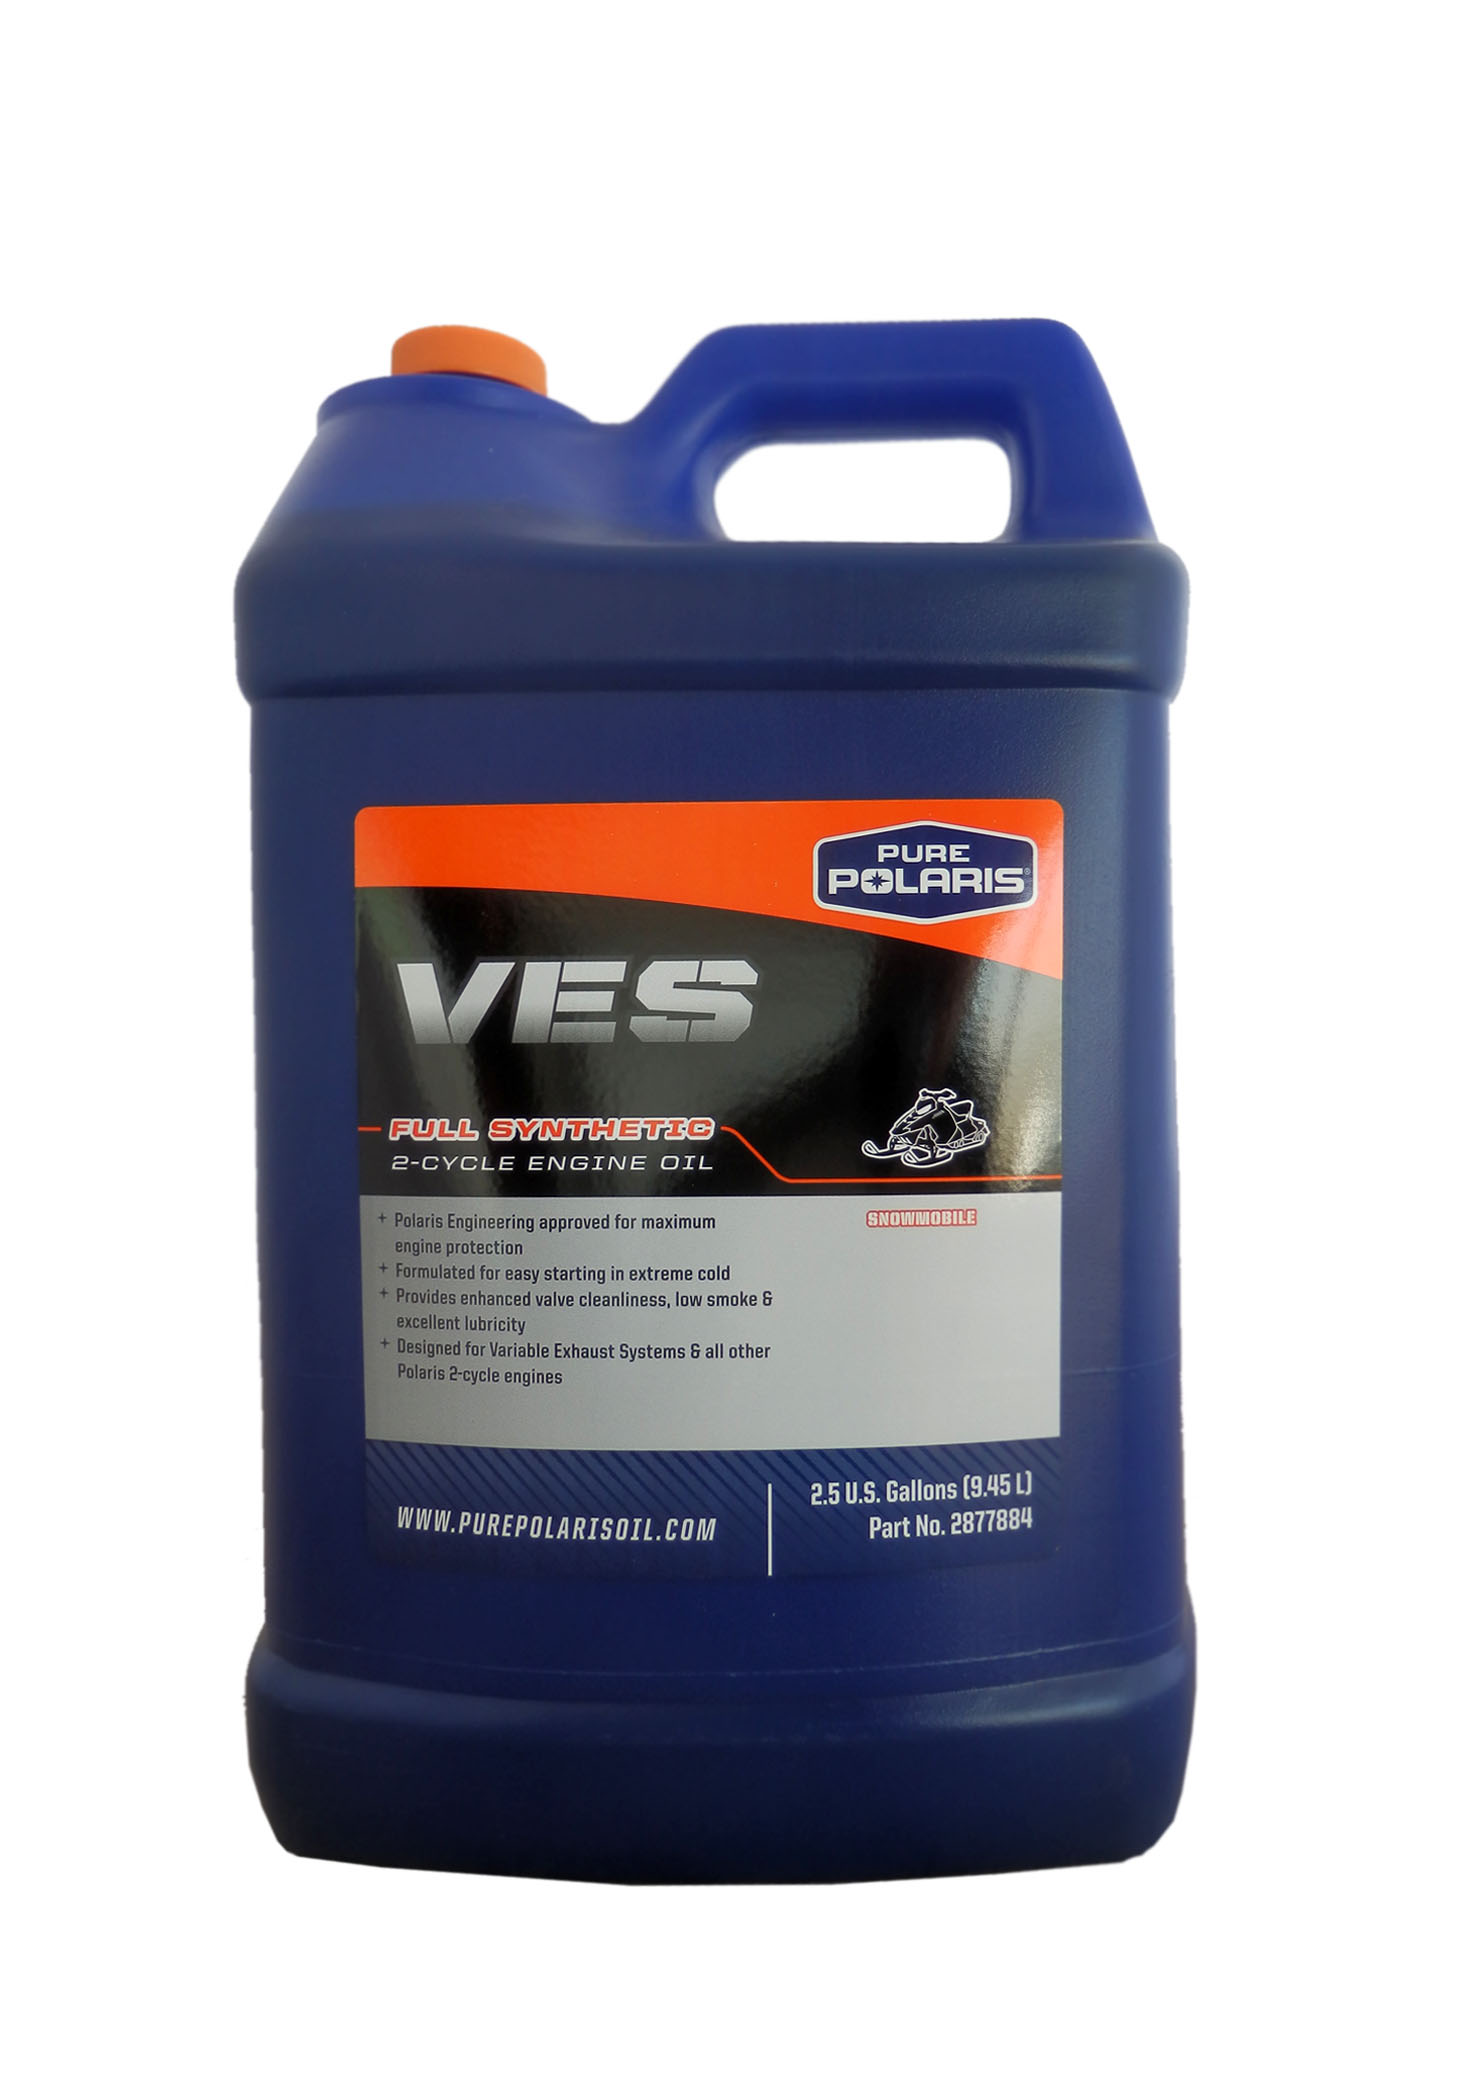 Моторное масло Polaris 2877884 VES Full Synthetic 2-cycle Engine Oil  9.46 л